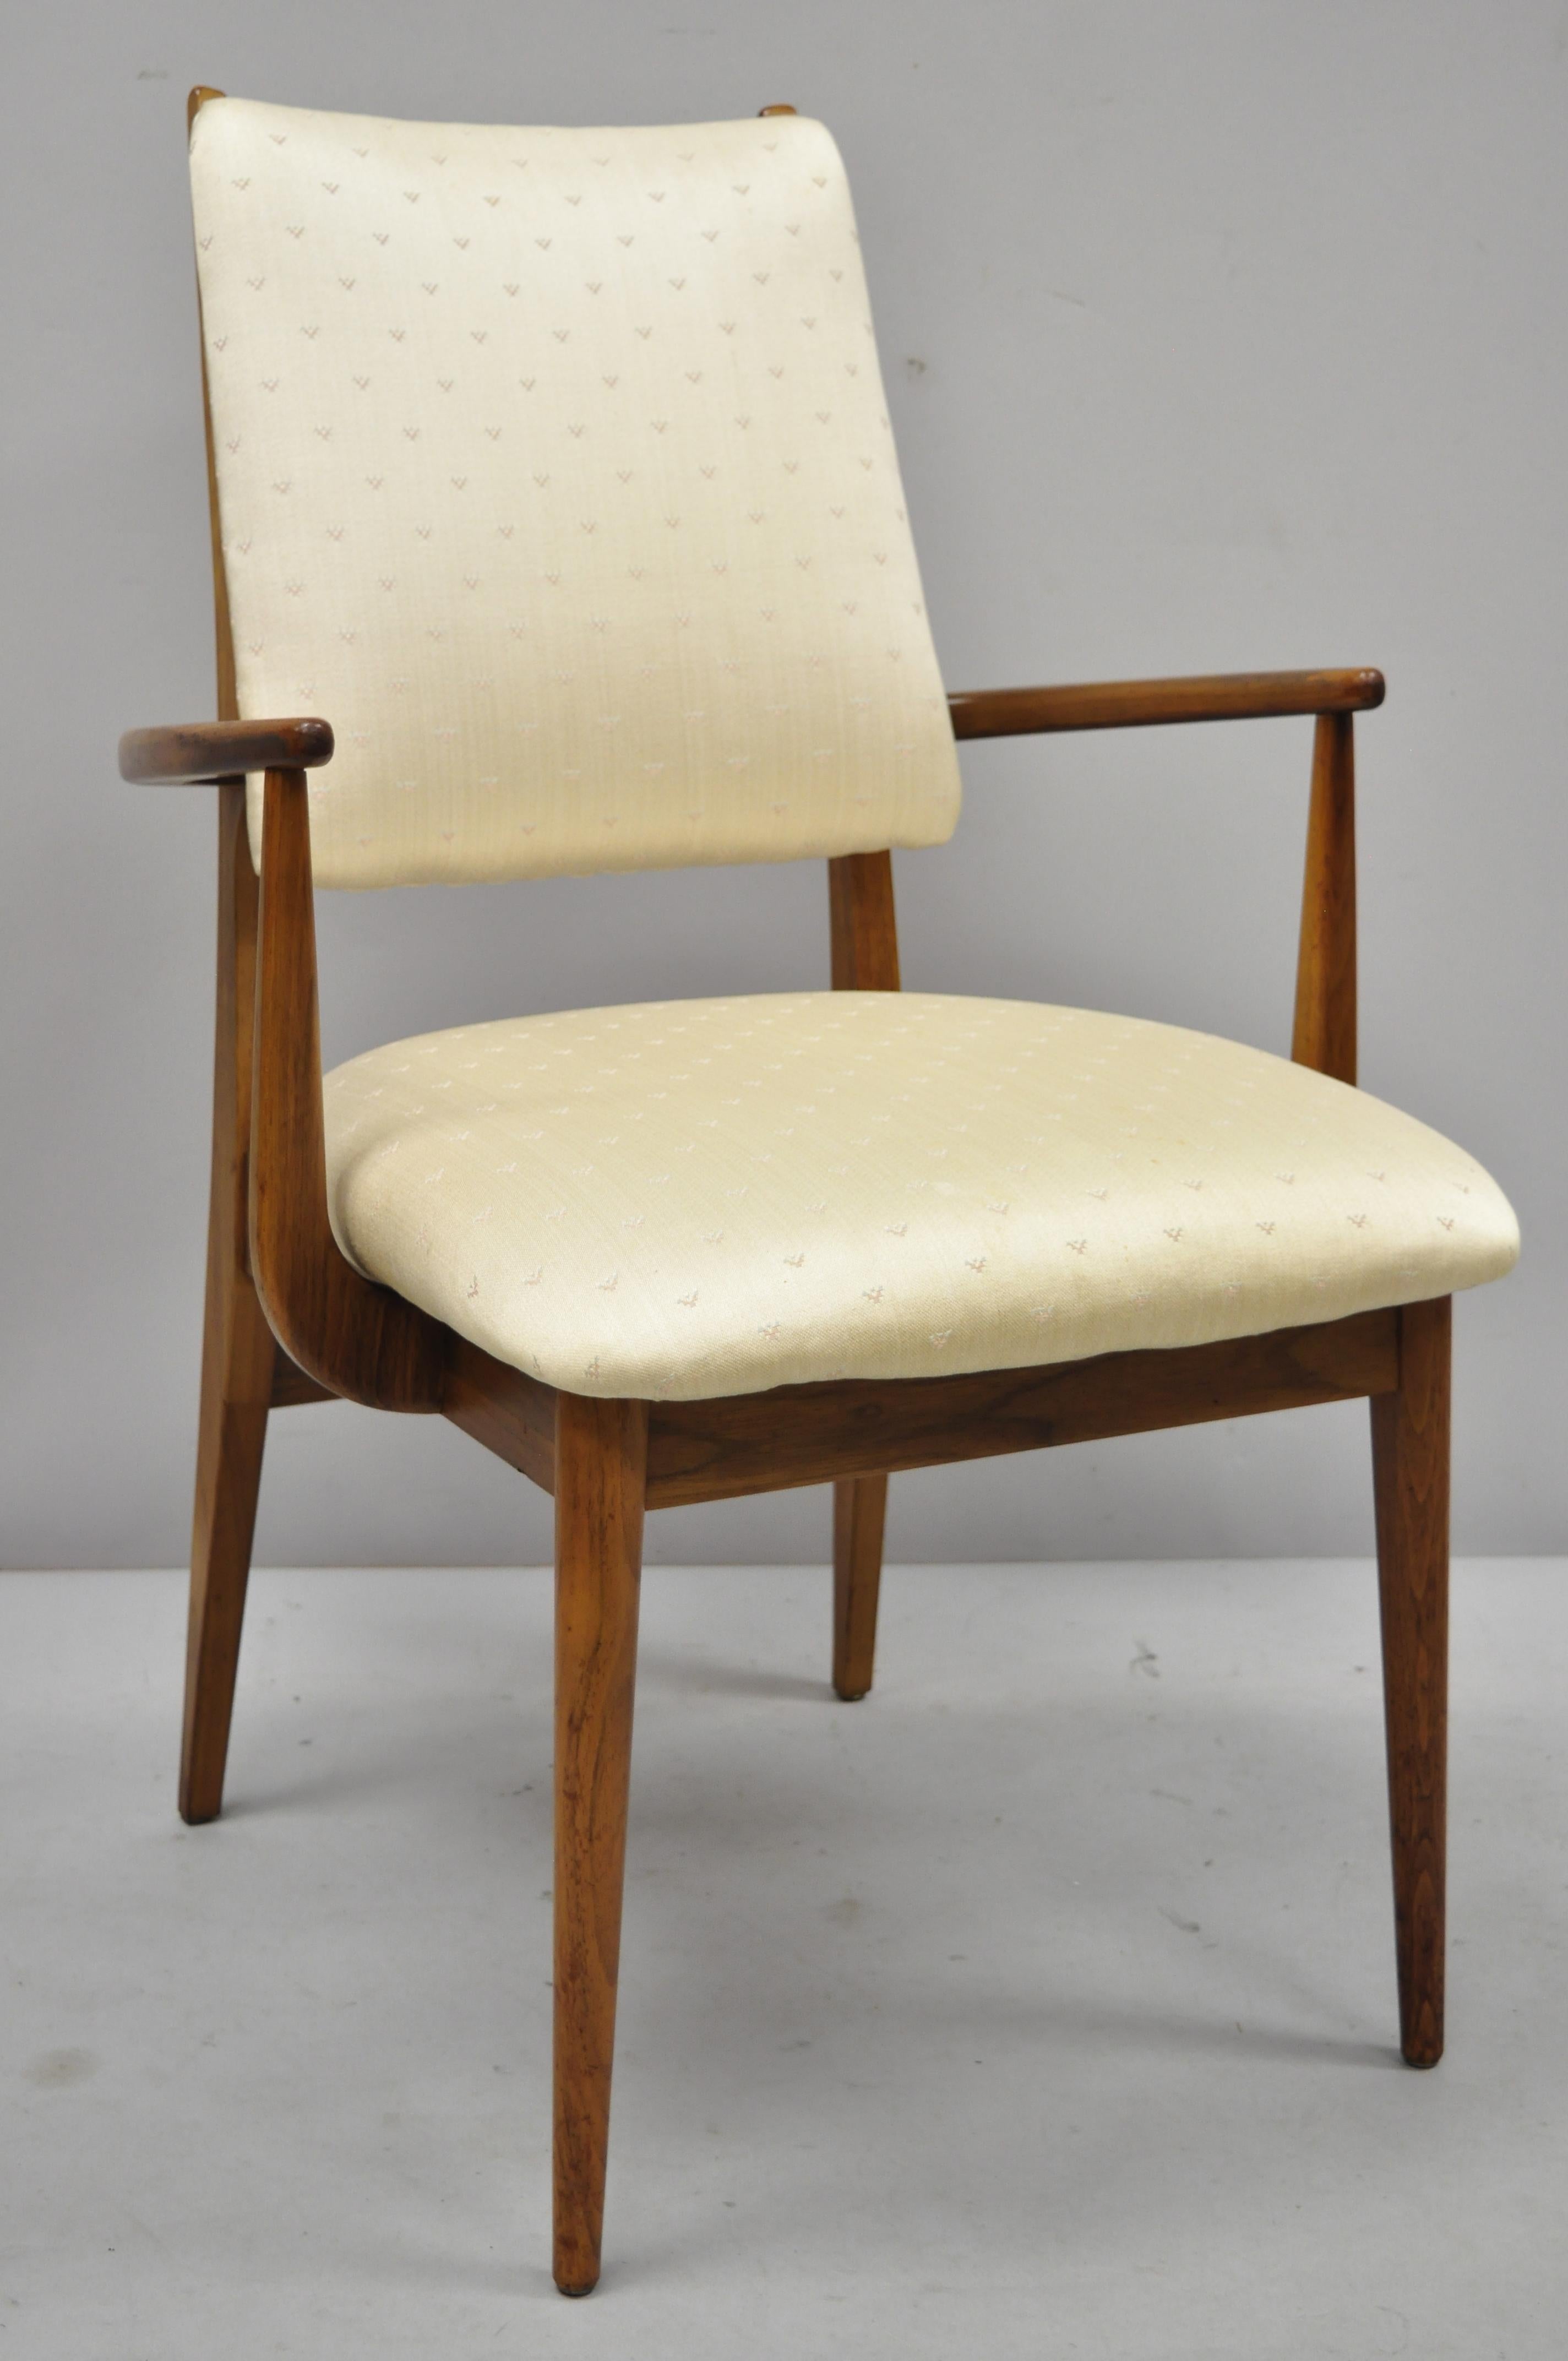 Set of 4 vintage mid century Danish modern walnut dining room chairs. Listing includes (2) armchairs, (2) side chairs, solid wood frame, beautiful wood grain, upholstered back end seat, tapered legs, clean modernist lines, sleek sculptural form,